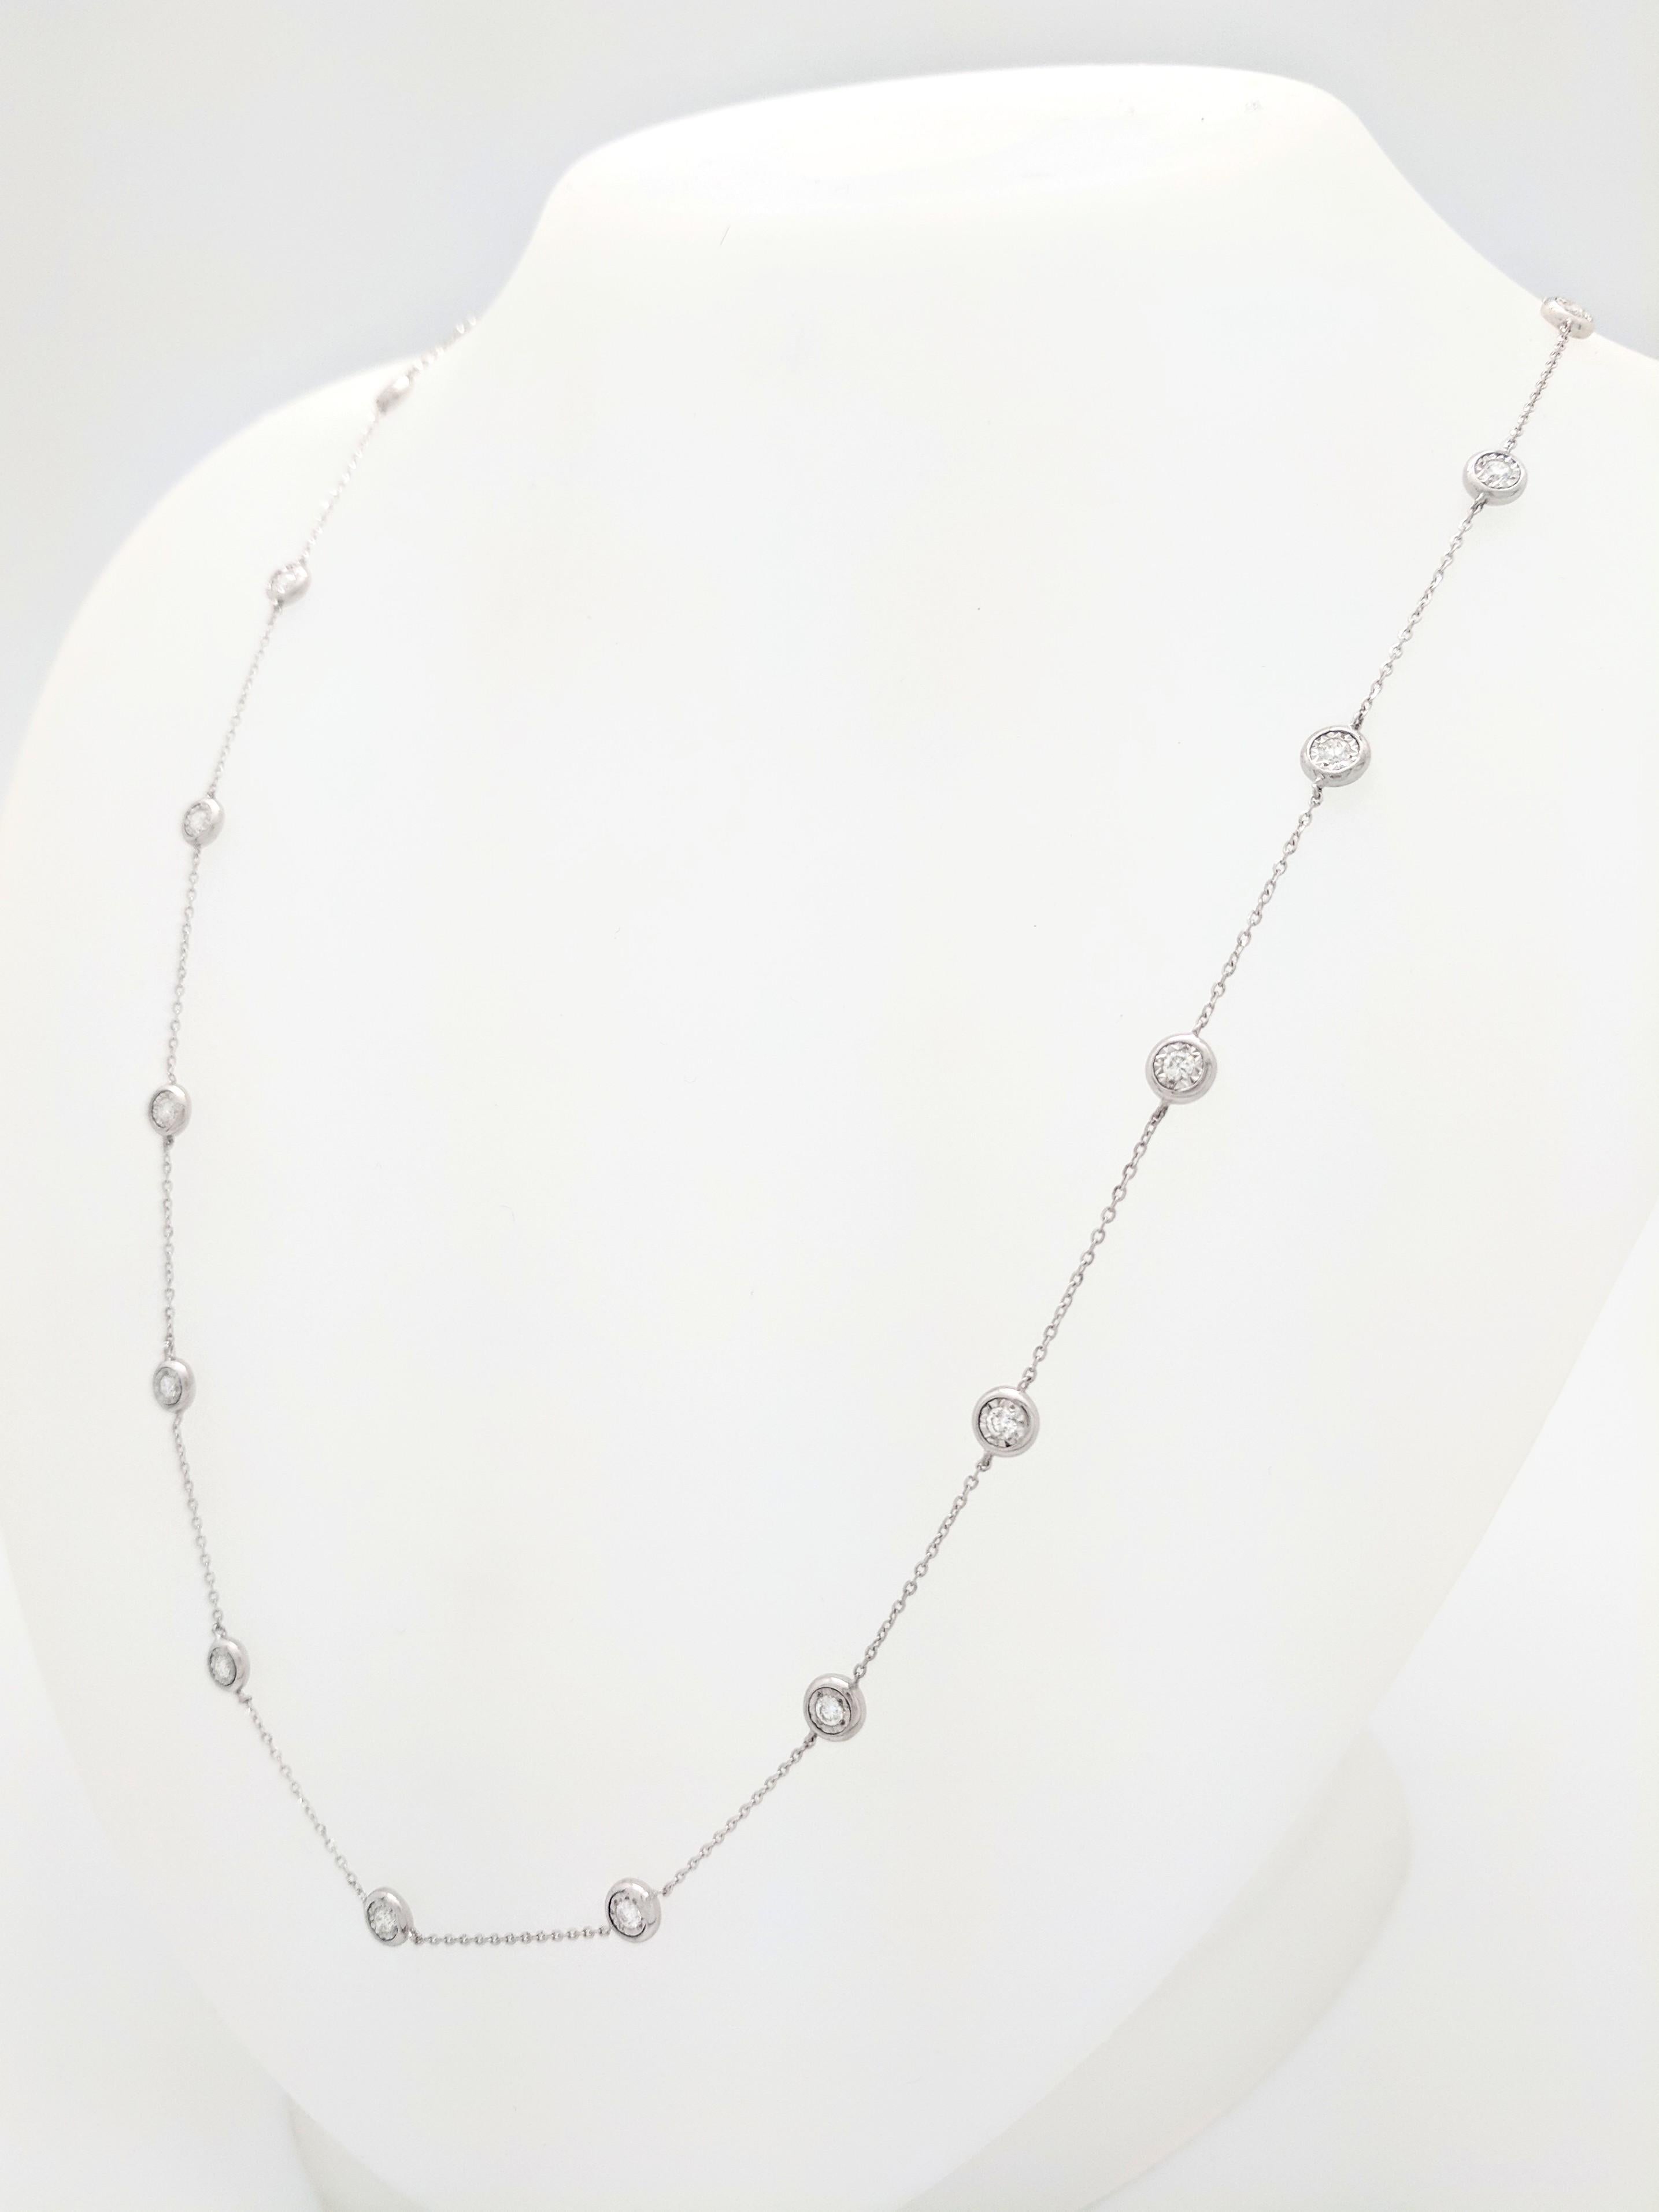 Contemporary 14 Karat White Gold Diamond by The Yard Necklace .93 Carat